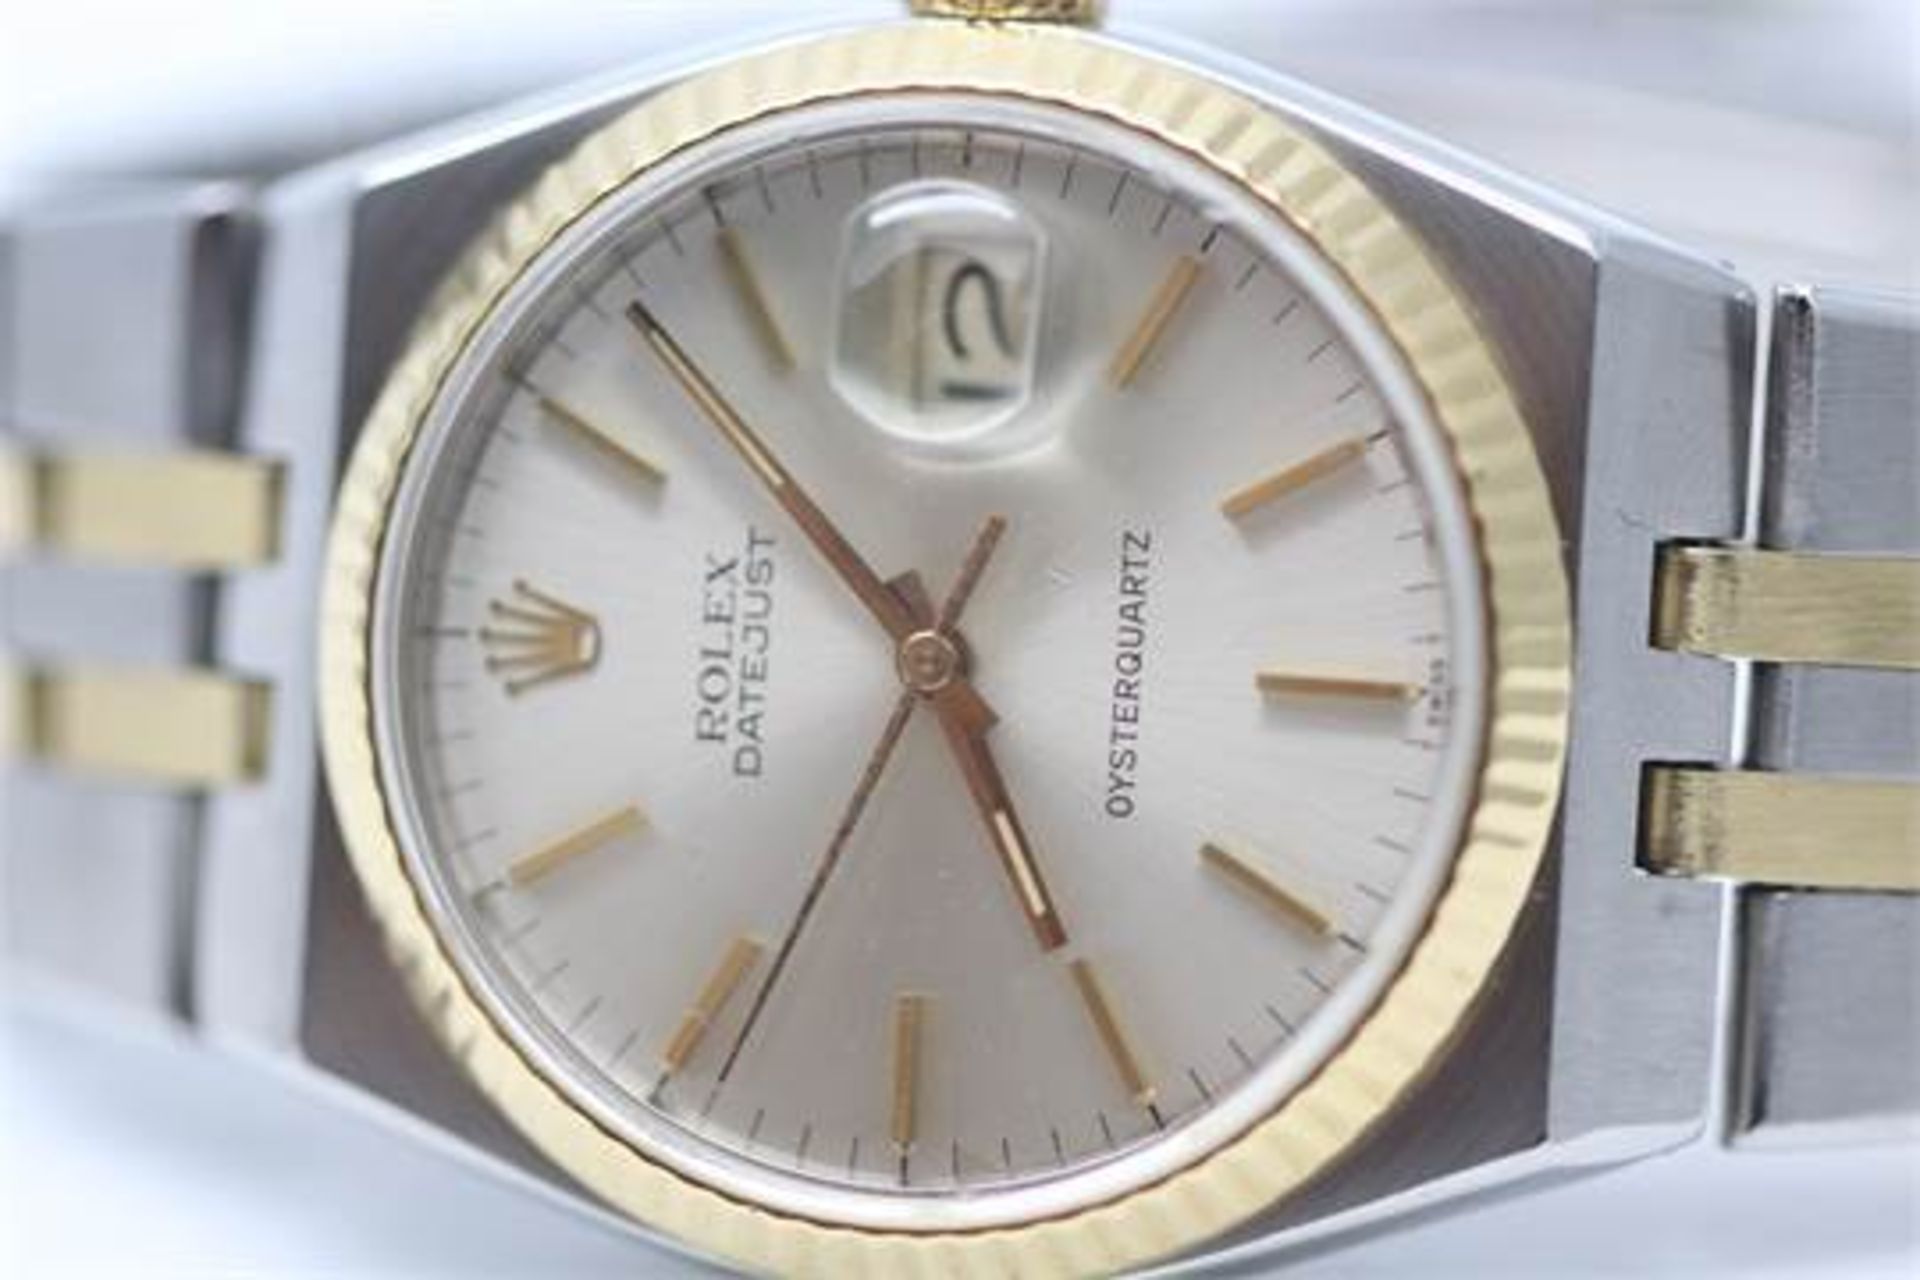 VINTAGE ROLEX OYSTER QUARTZ, STAINLESS STEEL AND 18CT YELLOW GOLD, 36MM, CHAMPAYNE BATON DIAL, - Image 2 of 6